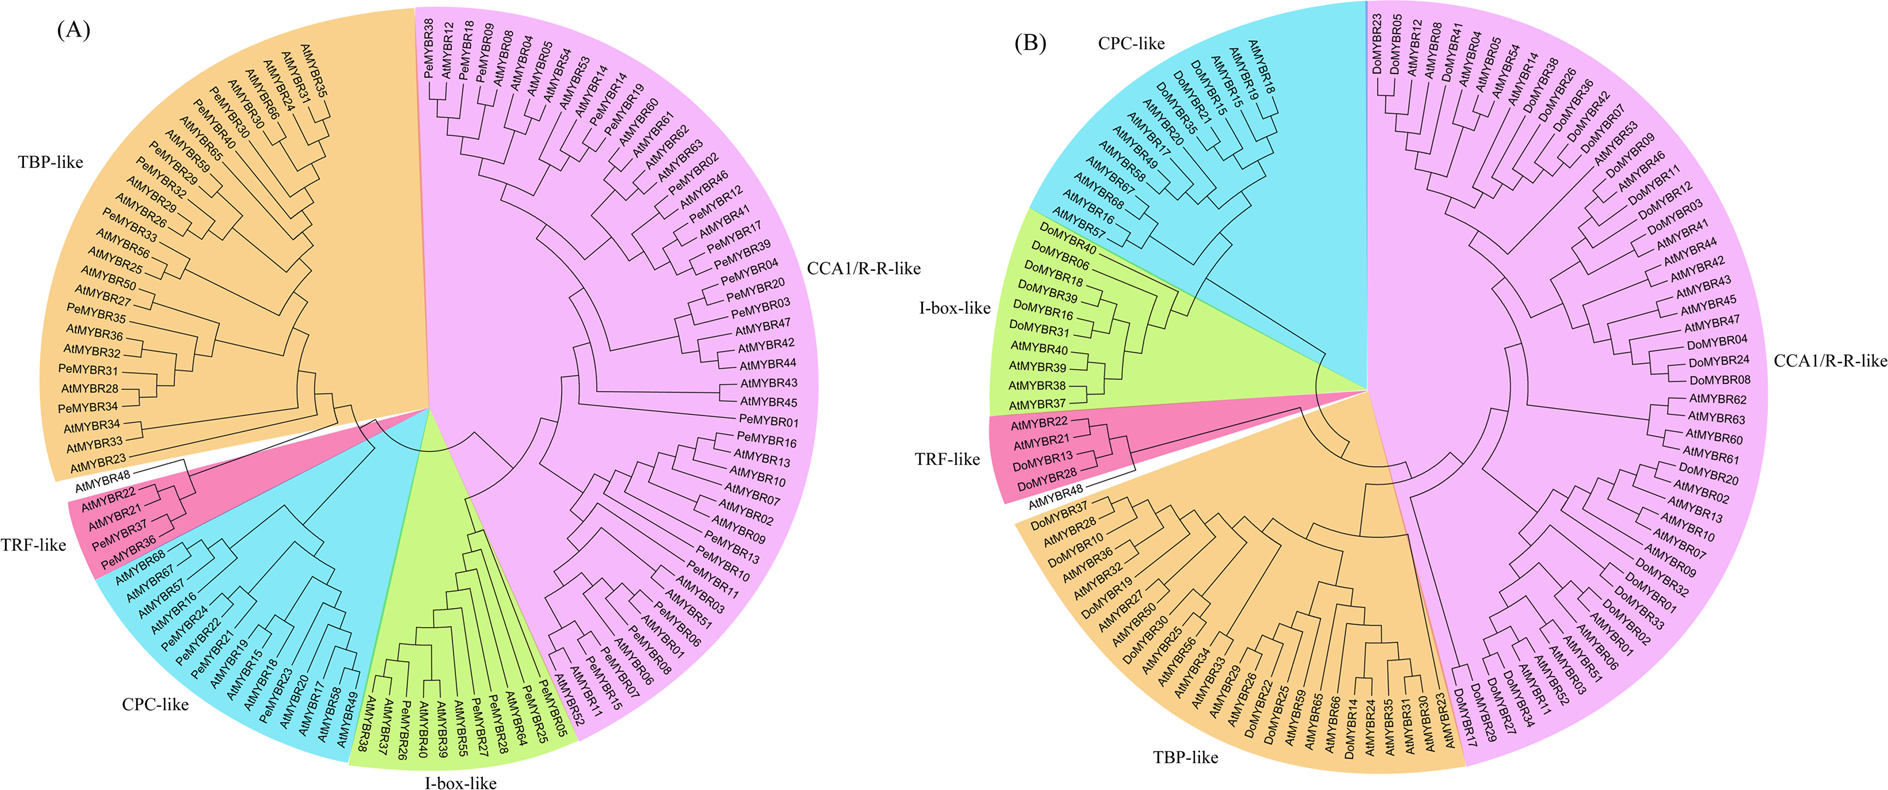 Mining Myb Transcription Factors From The Genomes Of Orchids